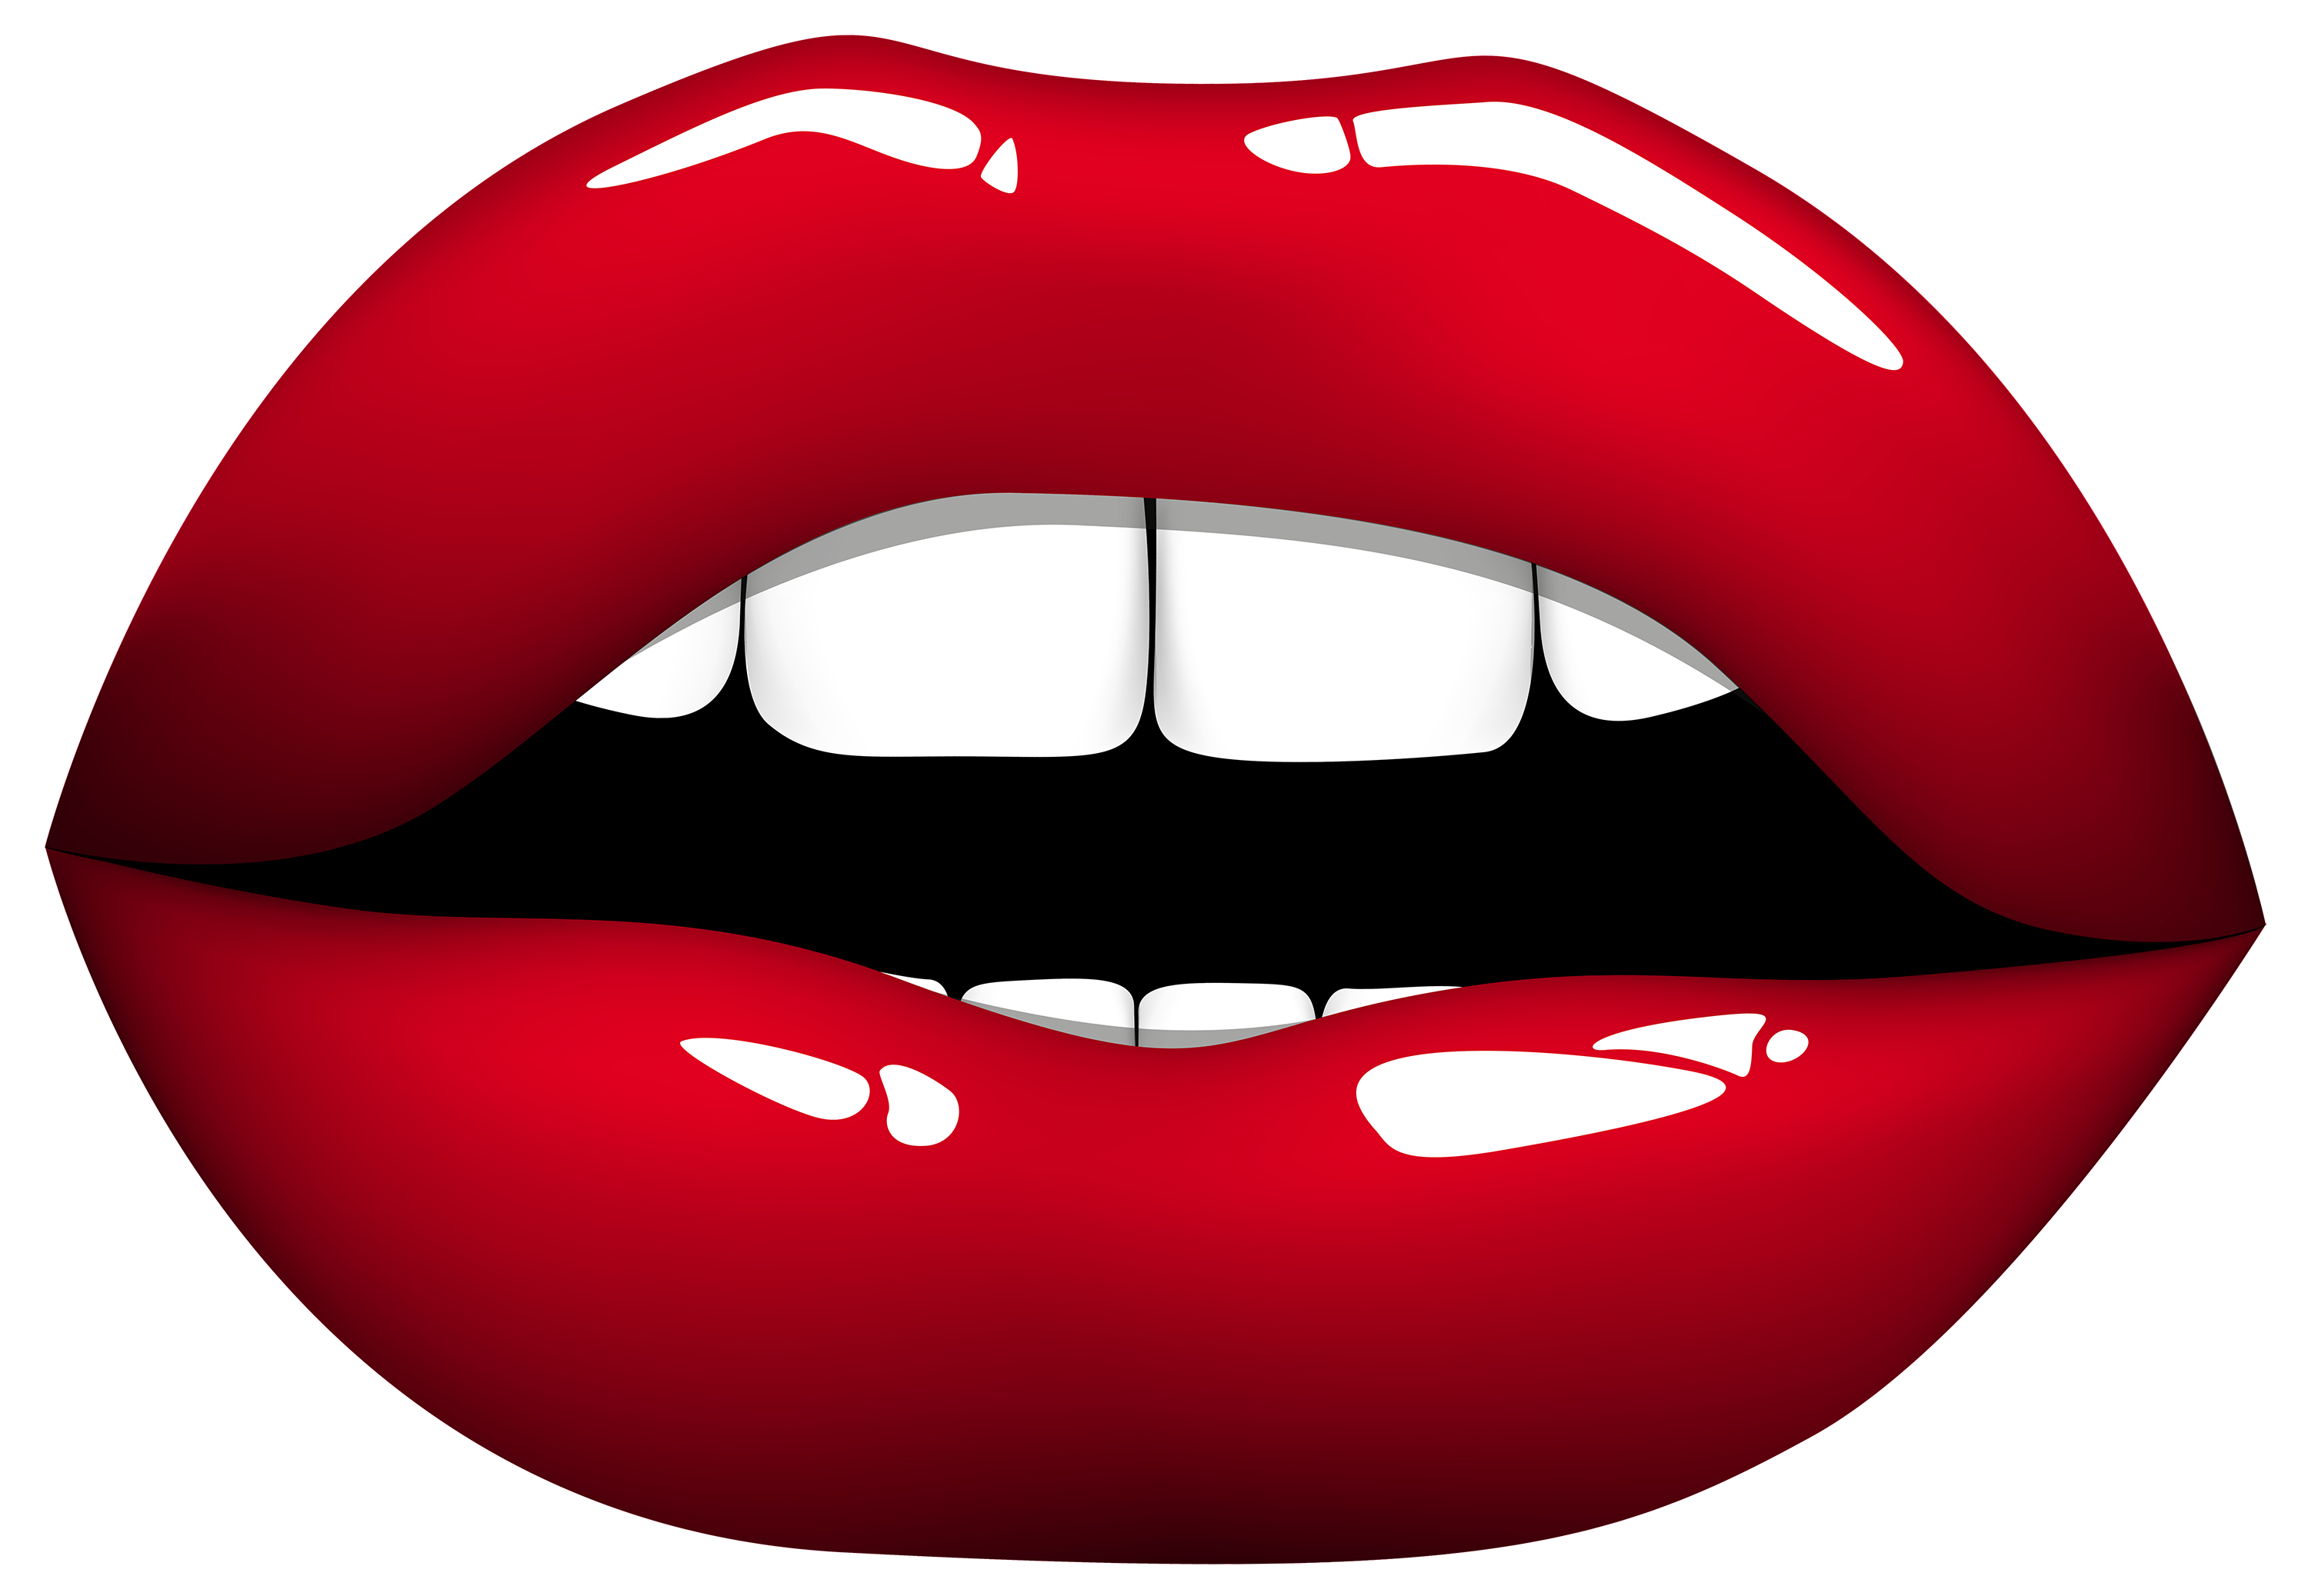 lips clip art image – Clipart Free Download